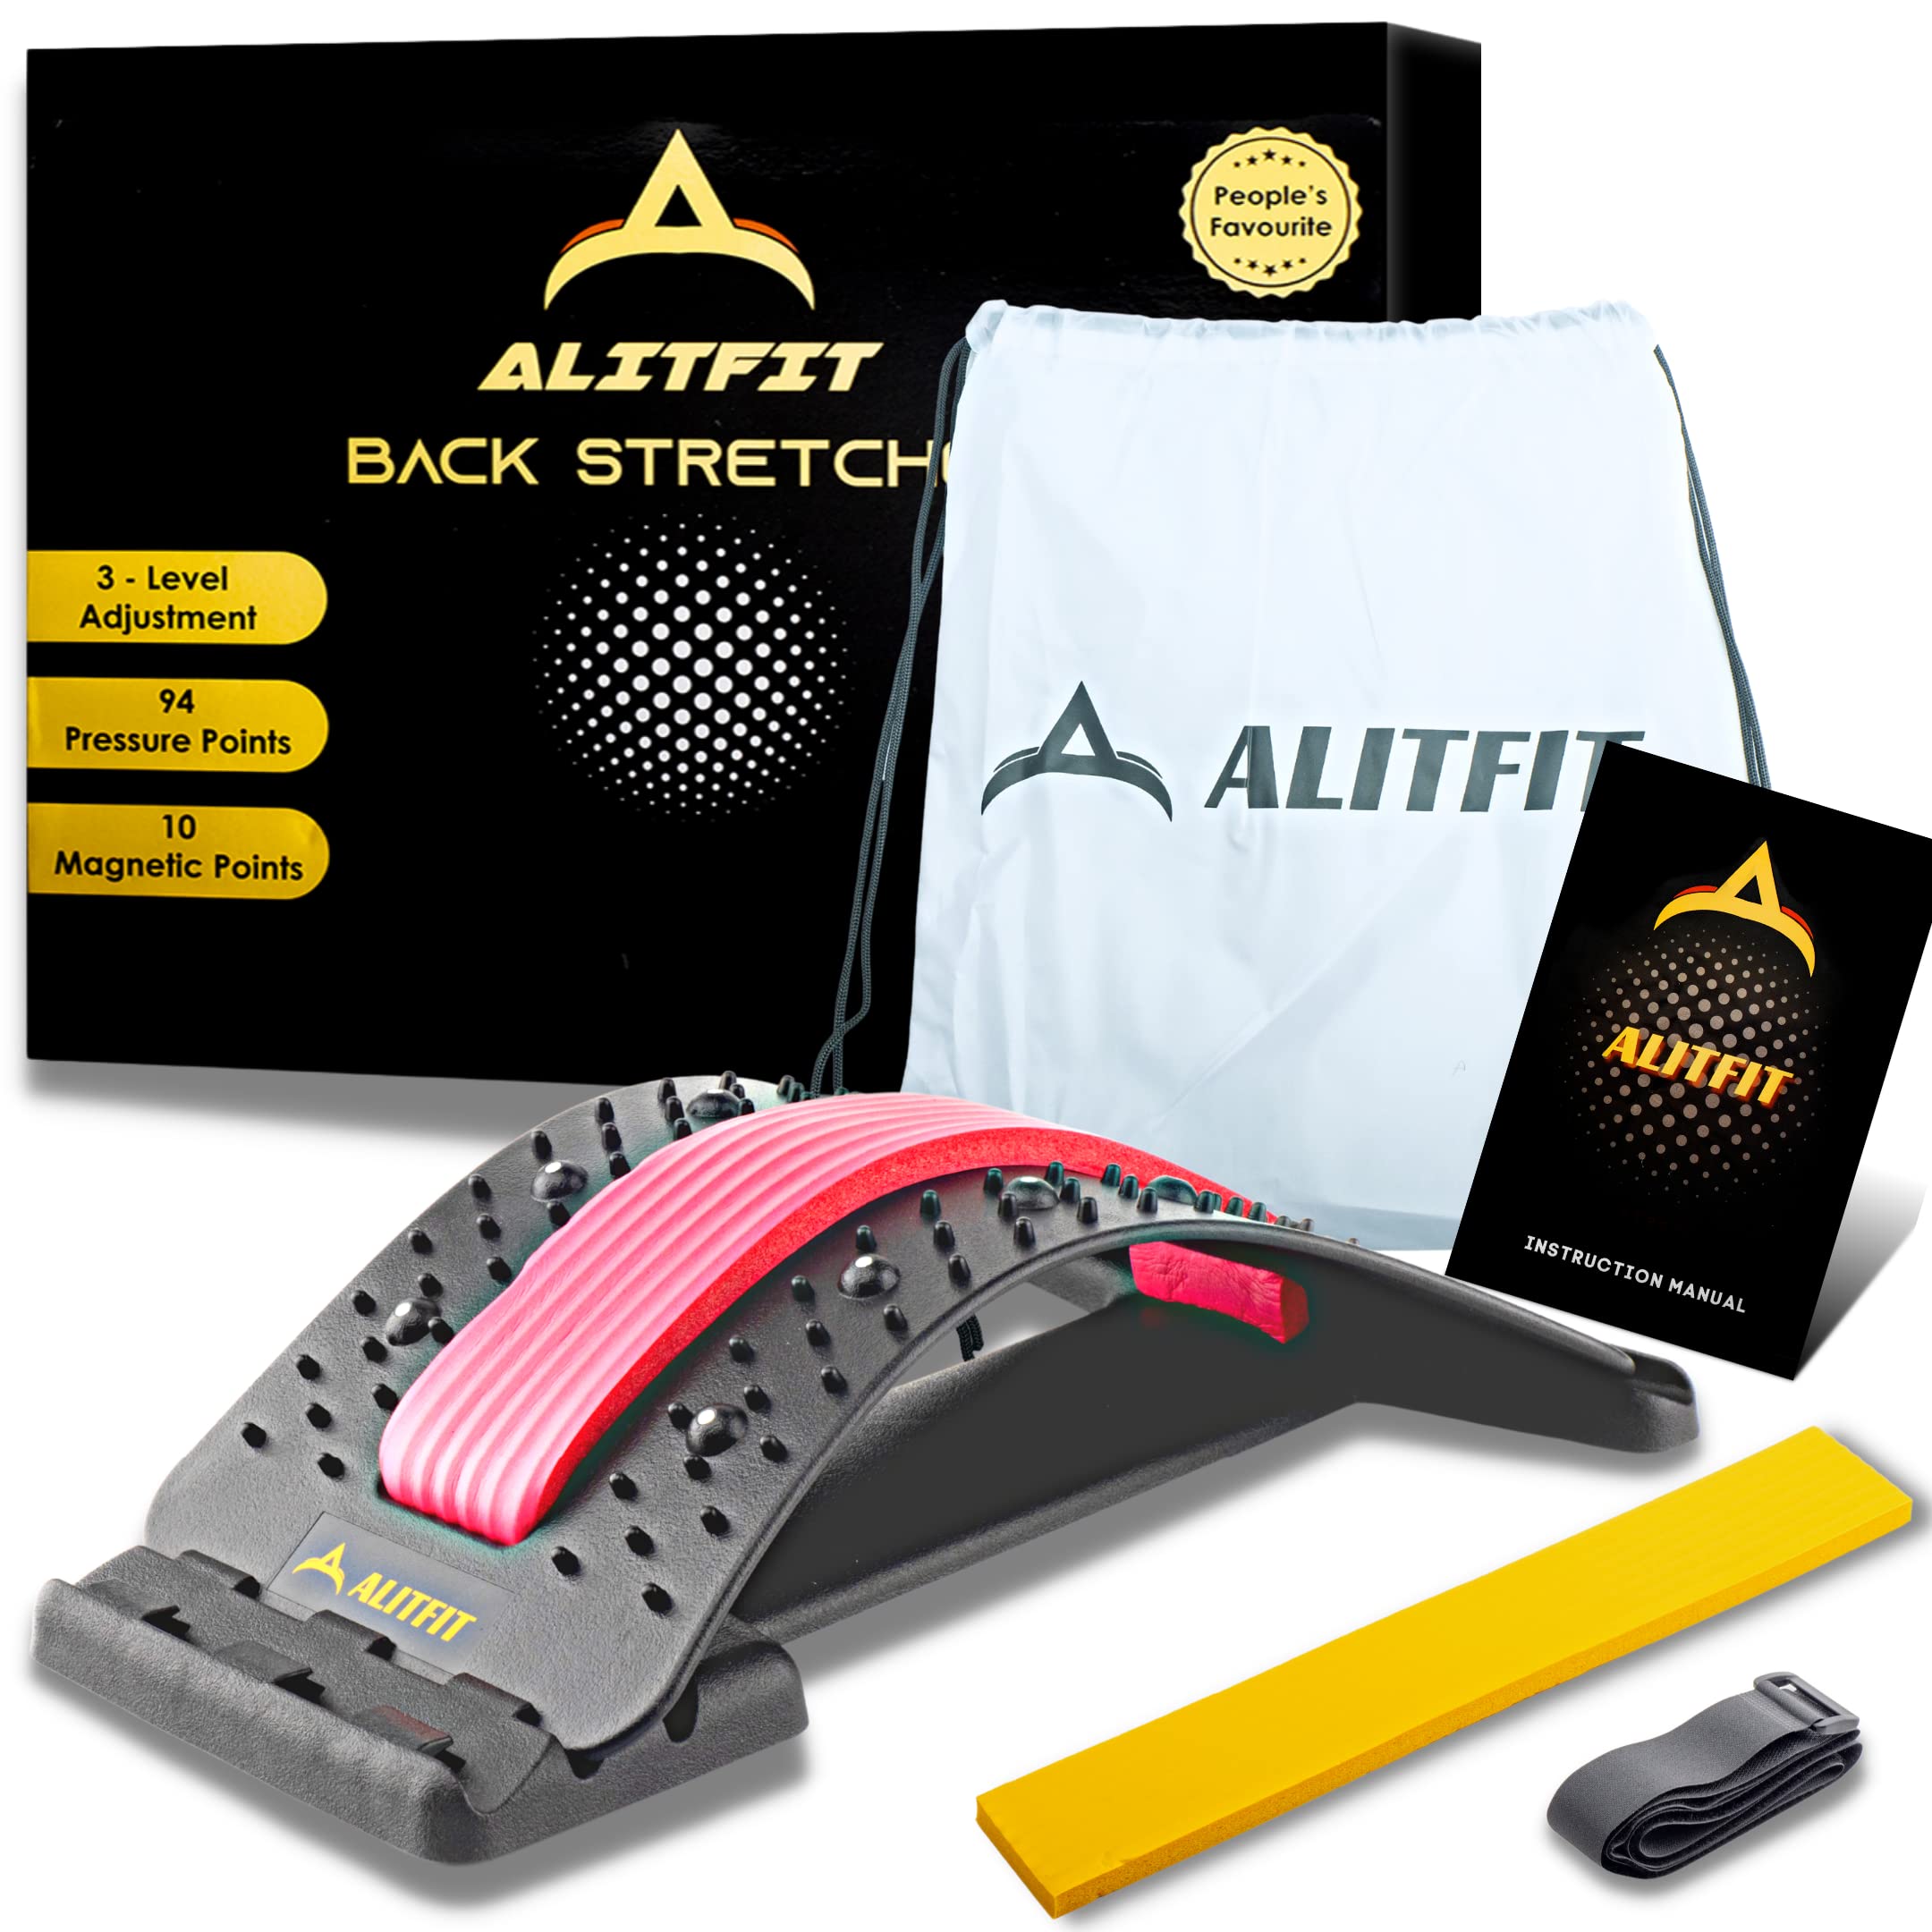 Alitfit Back Stretcher with Magnetic Acupressure Points, Multi-Level Spine Stretcher for Back Pain Relief and Posture Corrector- Include Free Carry Bag, Belt and Extra Deck Cushion